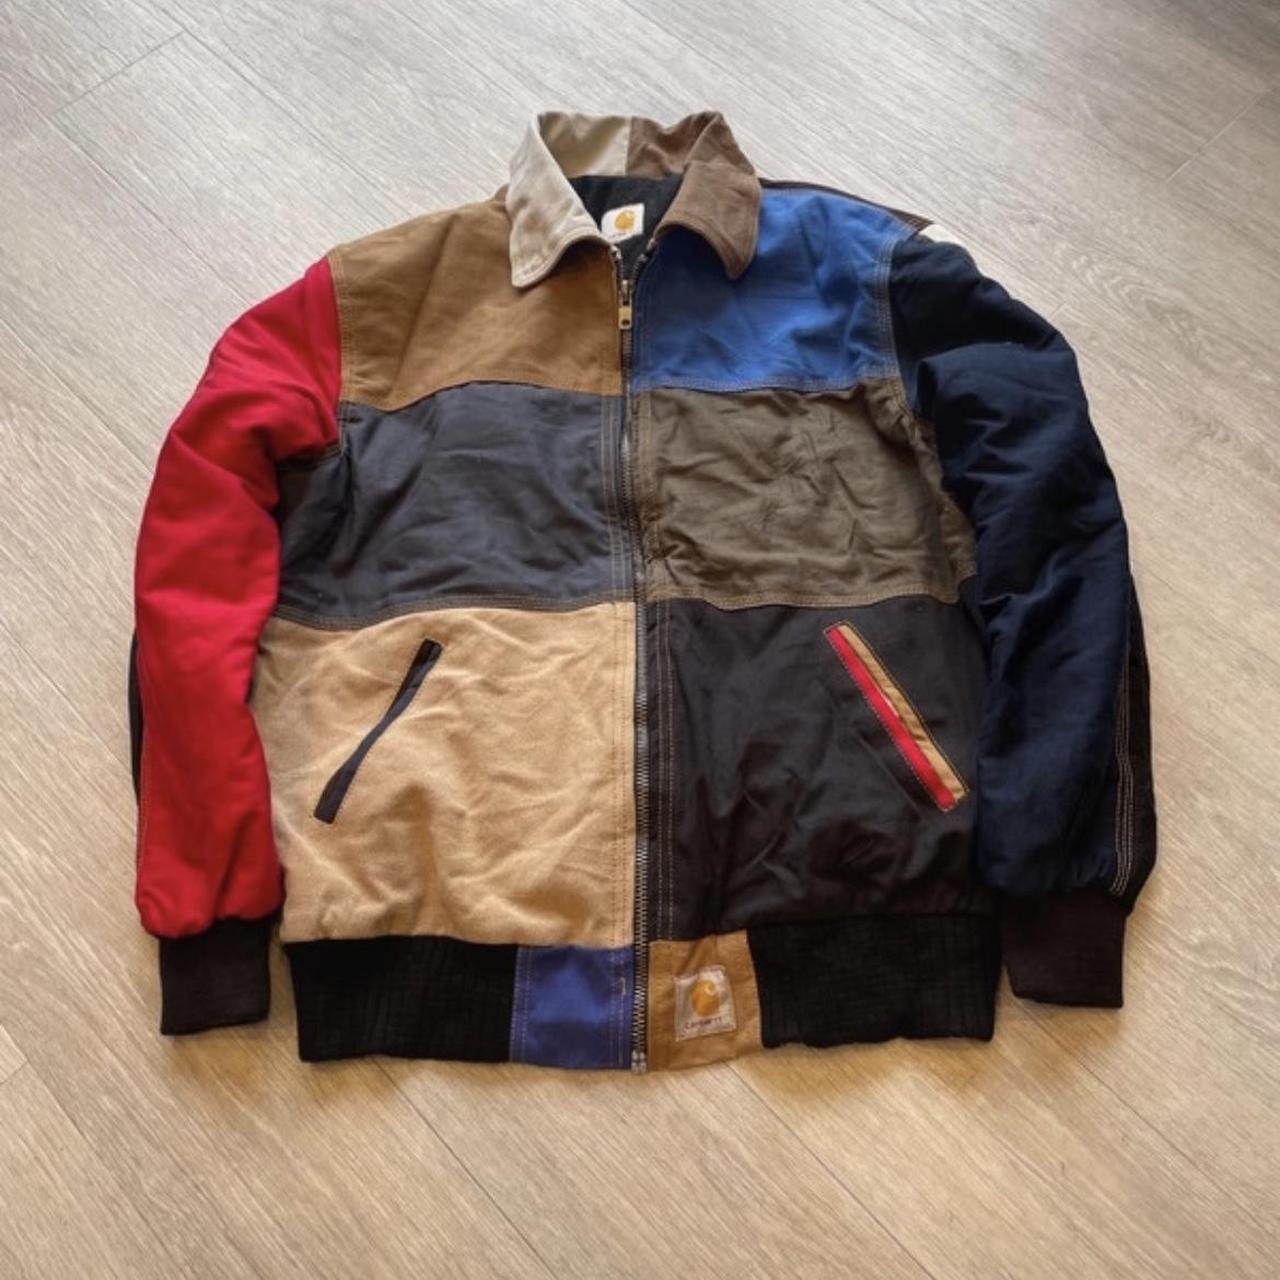 Carhartt Reworked canvas Jacket This is a reworked - Depop